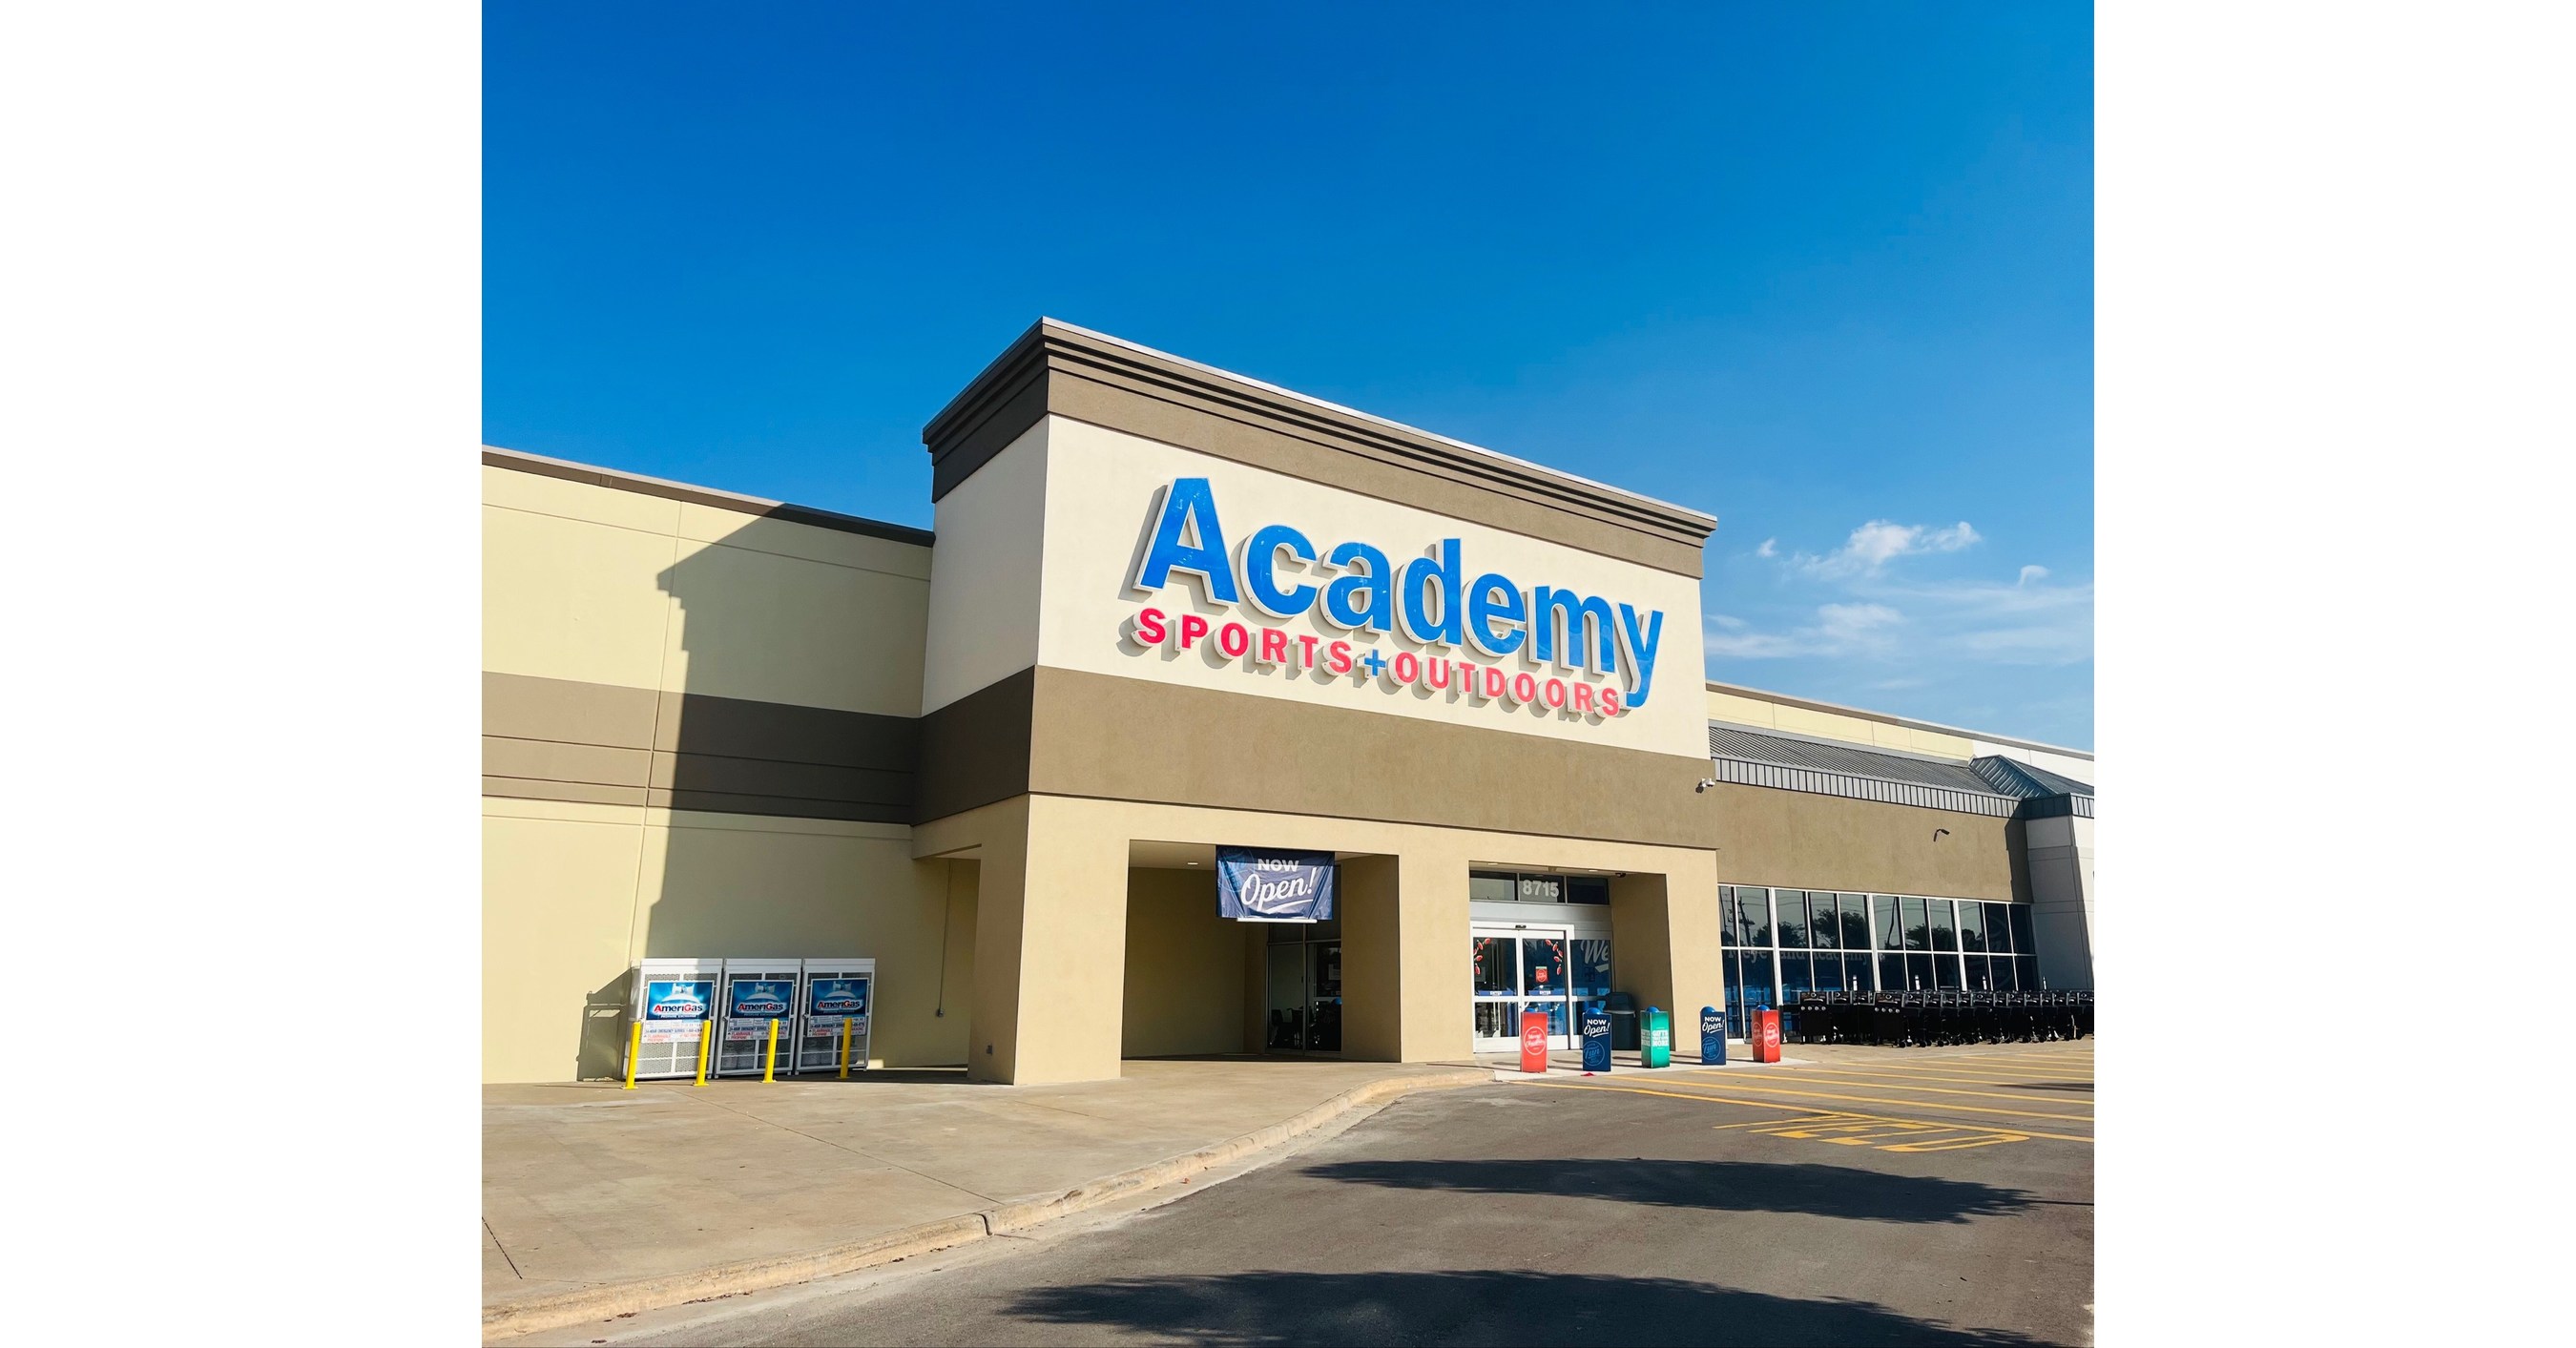 Academy Sports + Outdoors Continues Growth with New Store in Houston, Texas